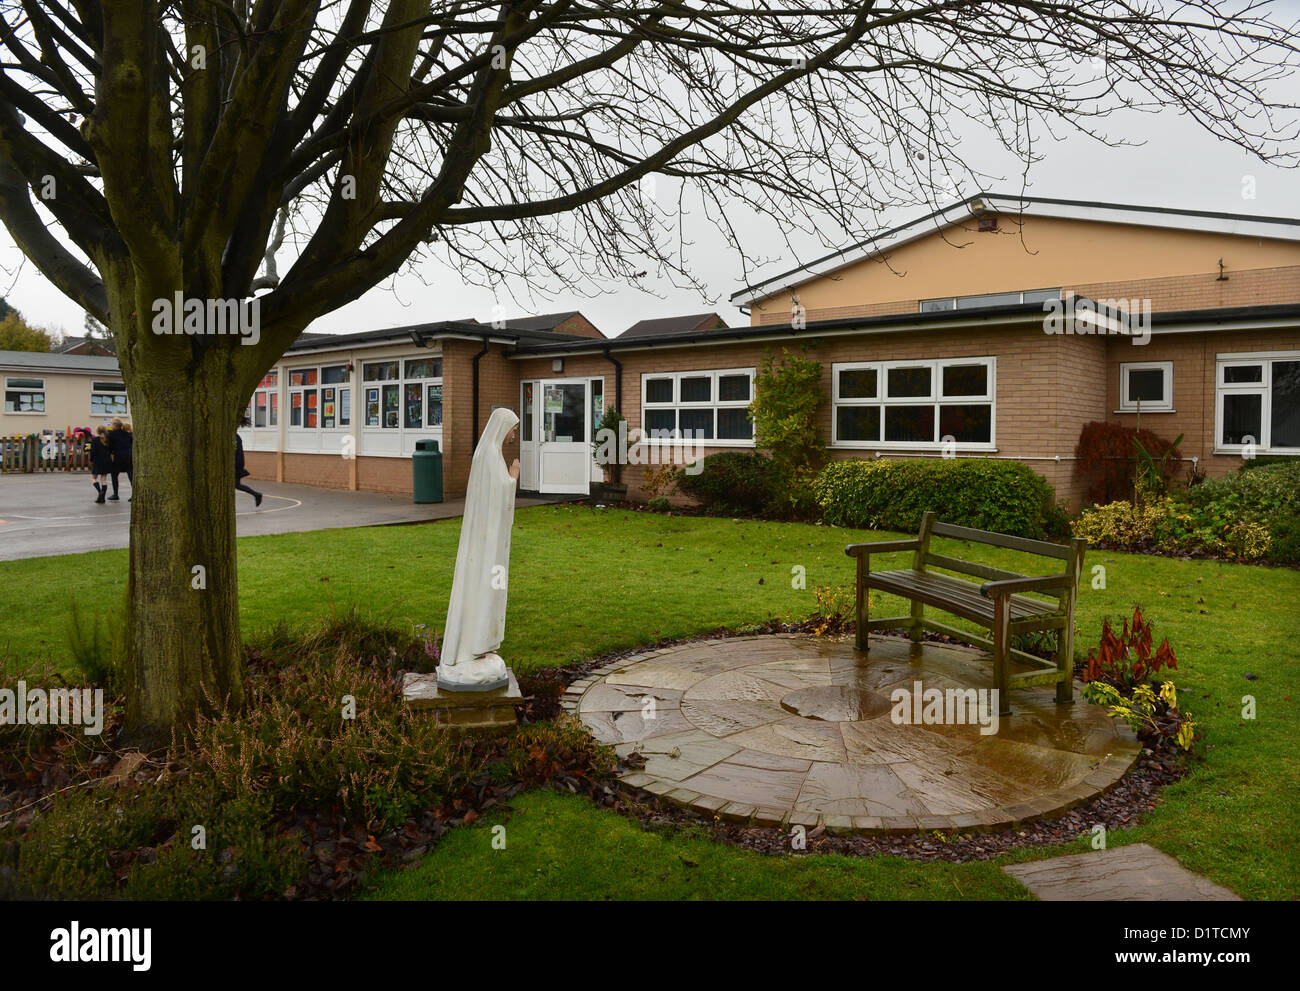 A sitting area and statue of the Madonna on a wet day at Our Lady & St. Werburgh's Catholic Primary School in Newcastle-under-Ly Stock Photo